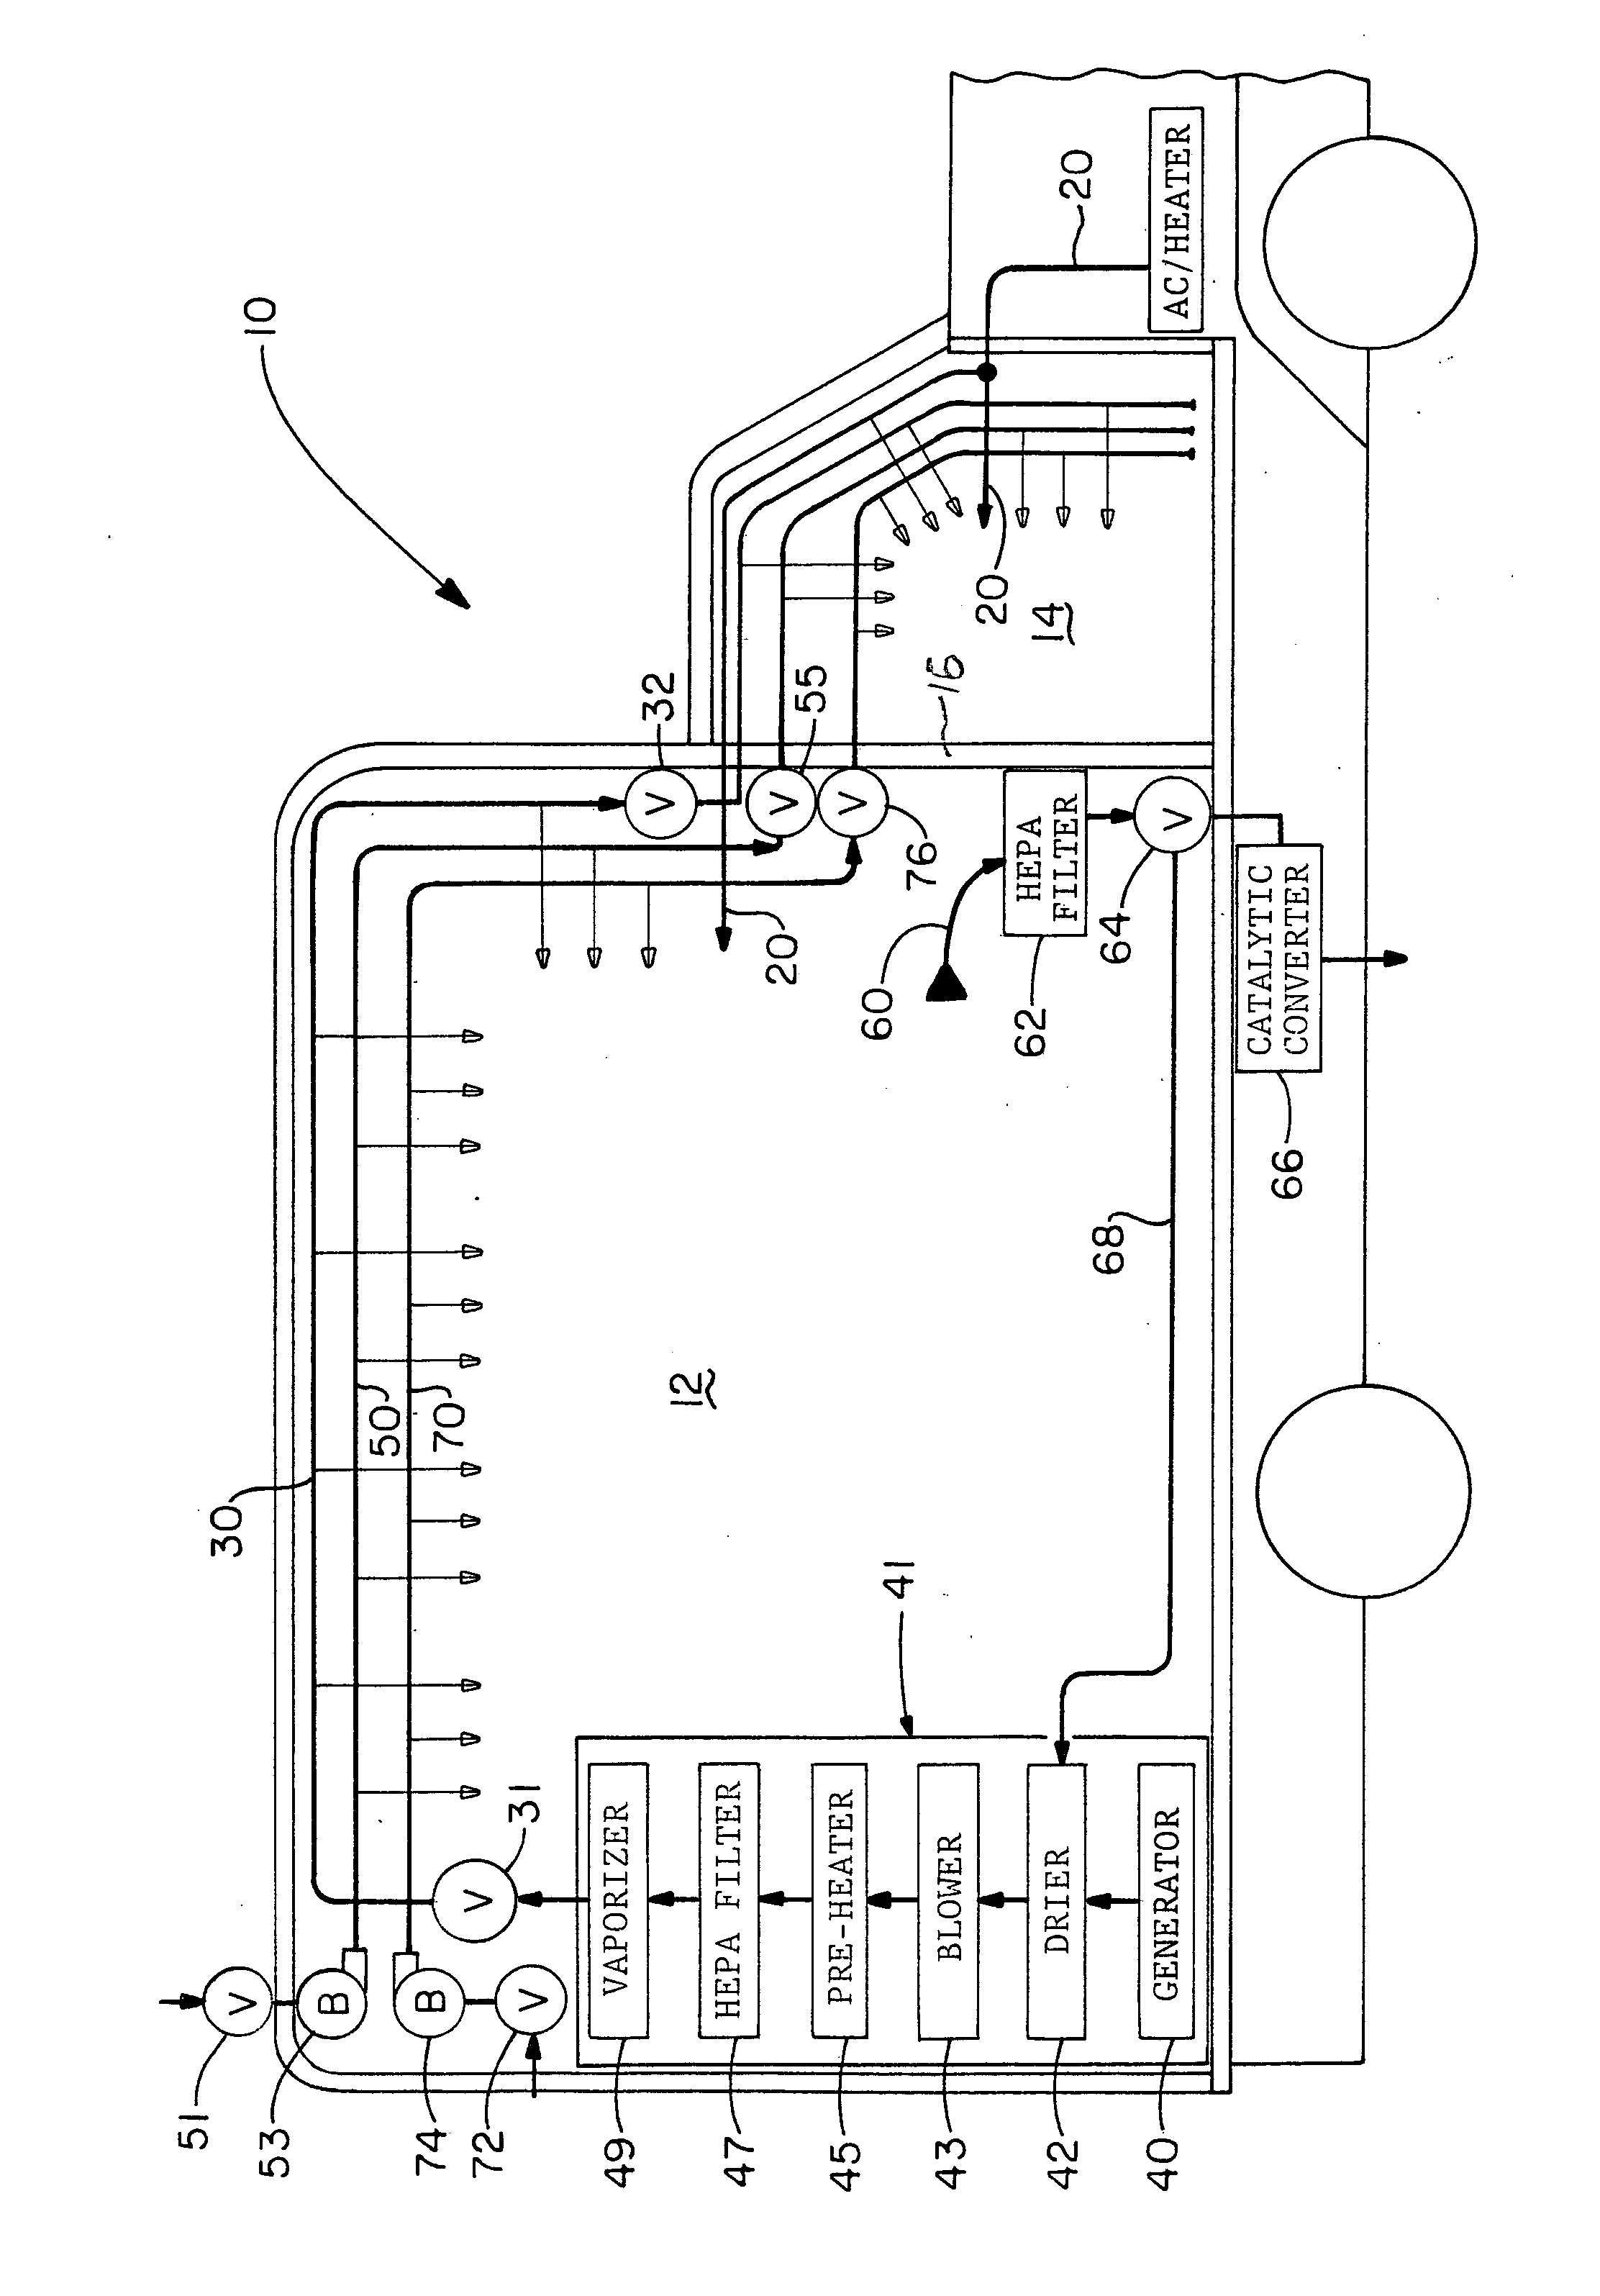 Integrated decontamination/aeration system for vehicles